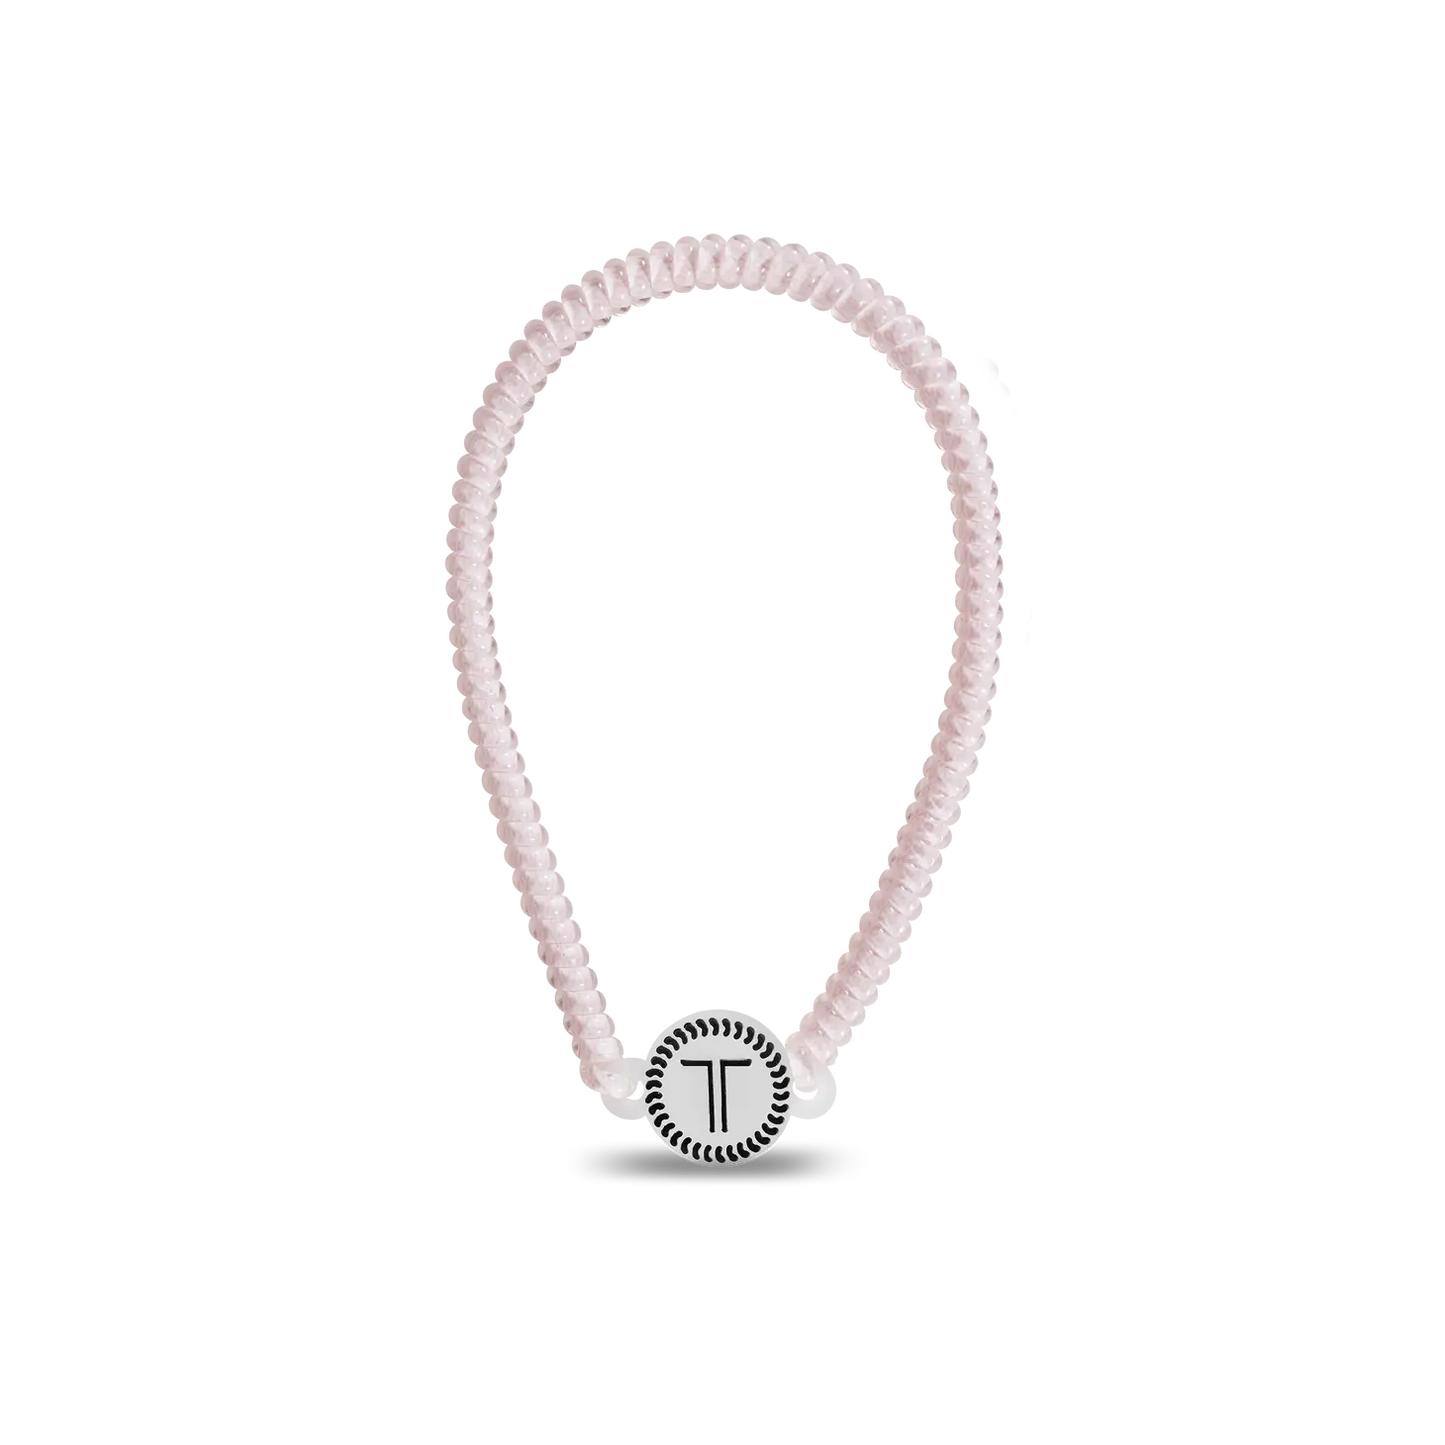 pale pink colored teletie headband